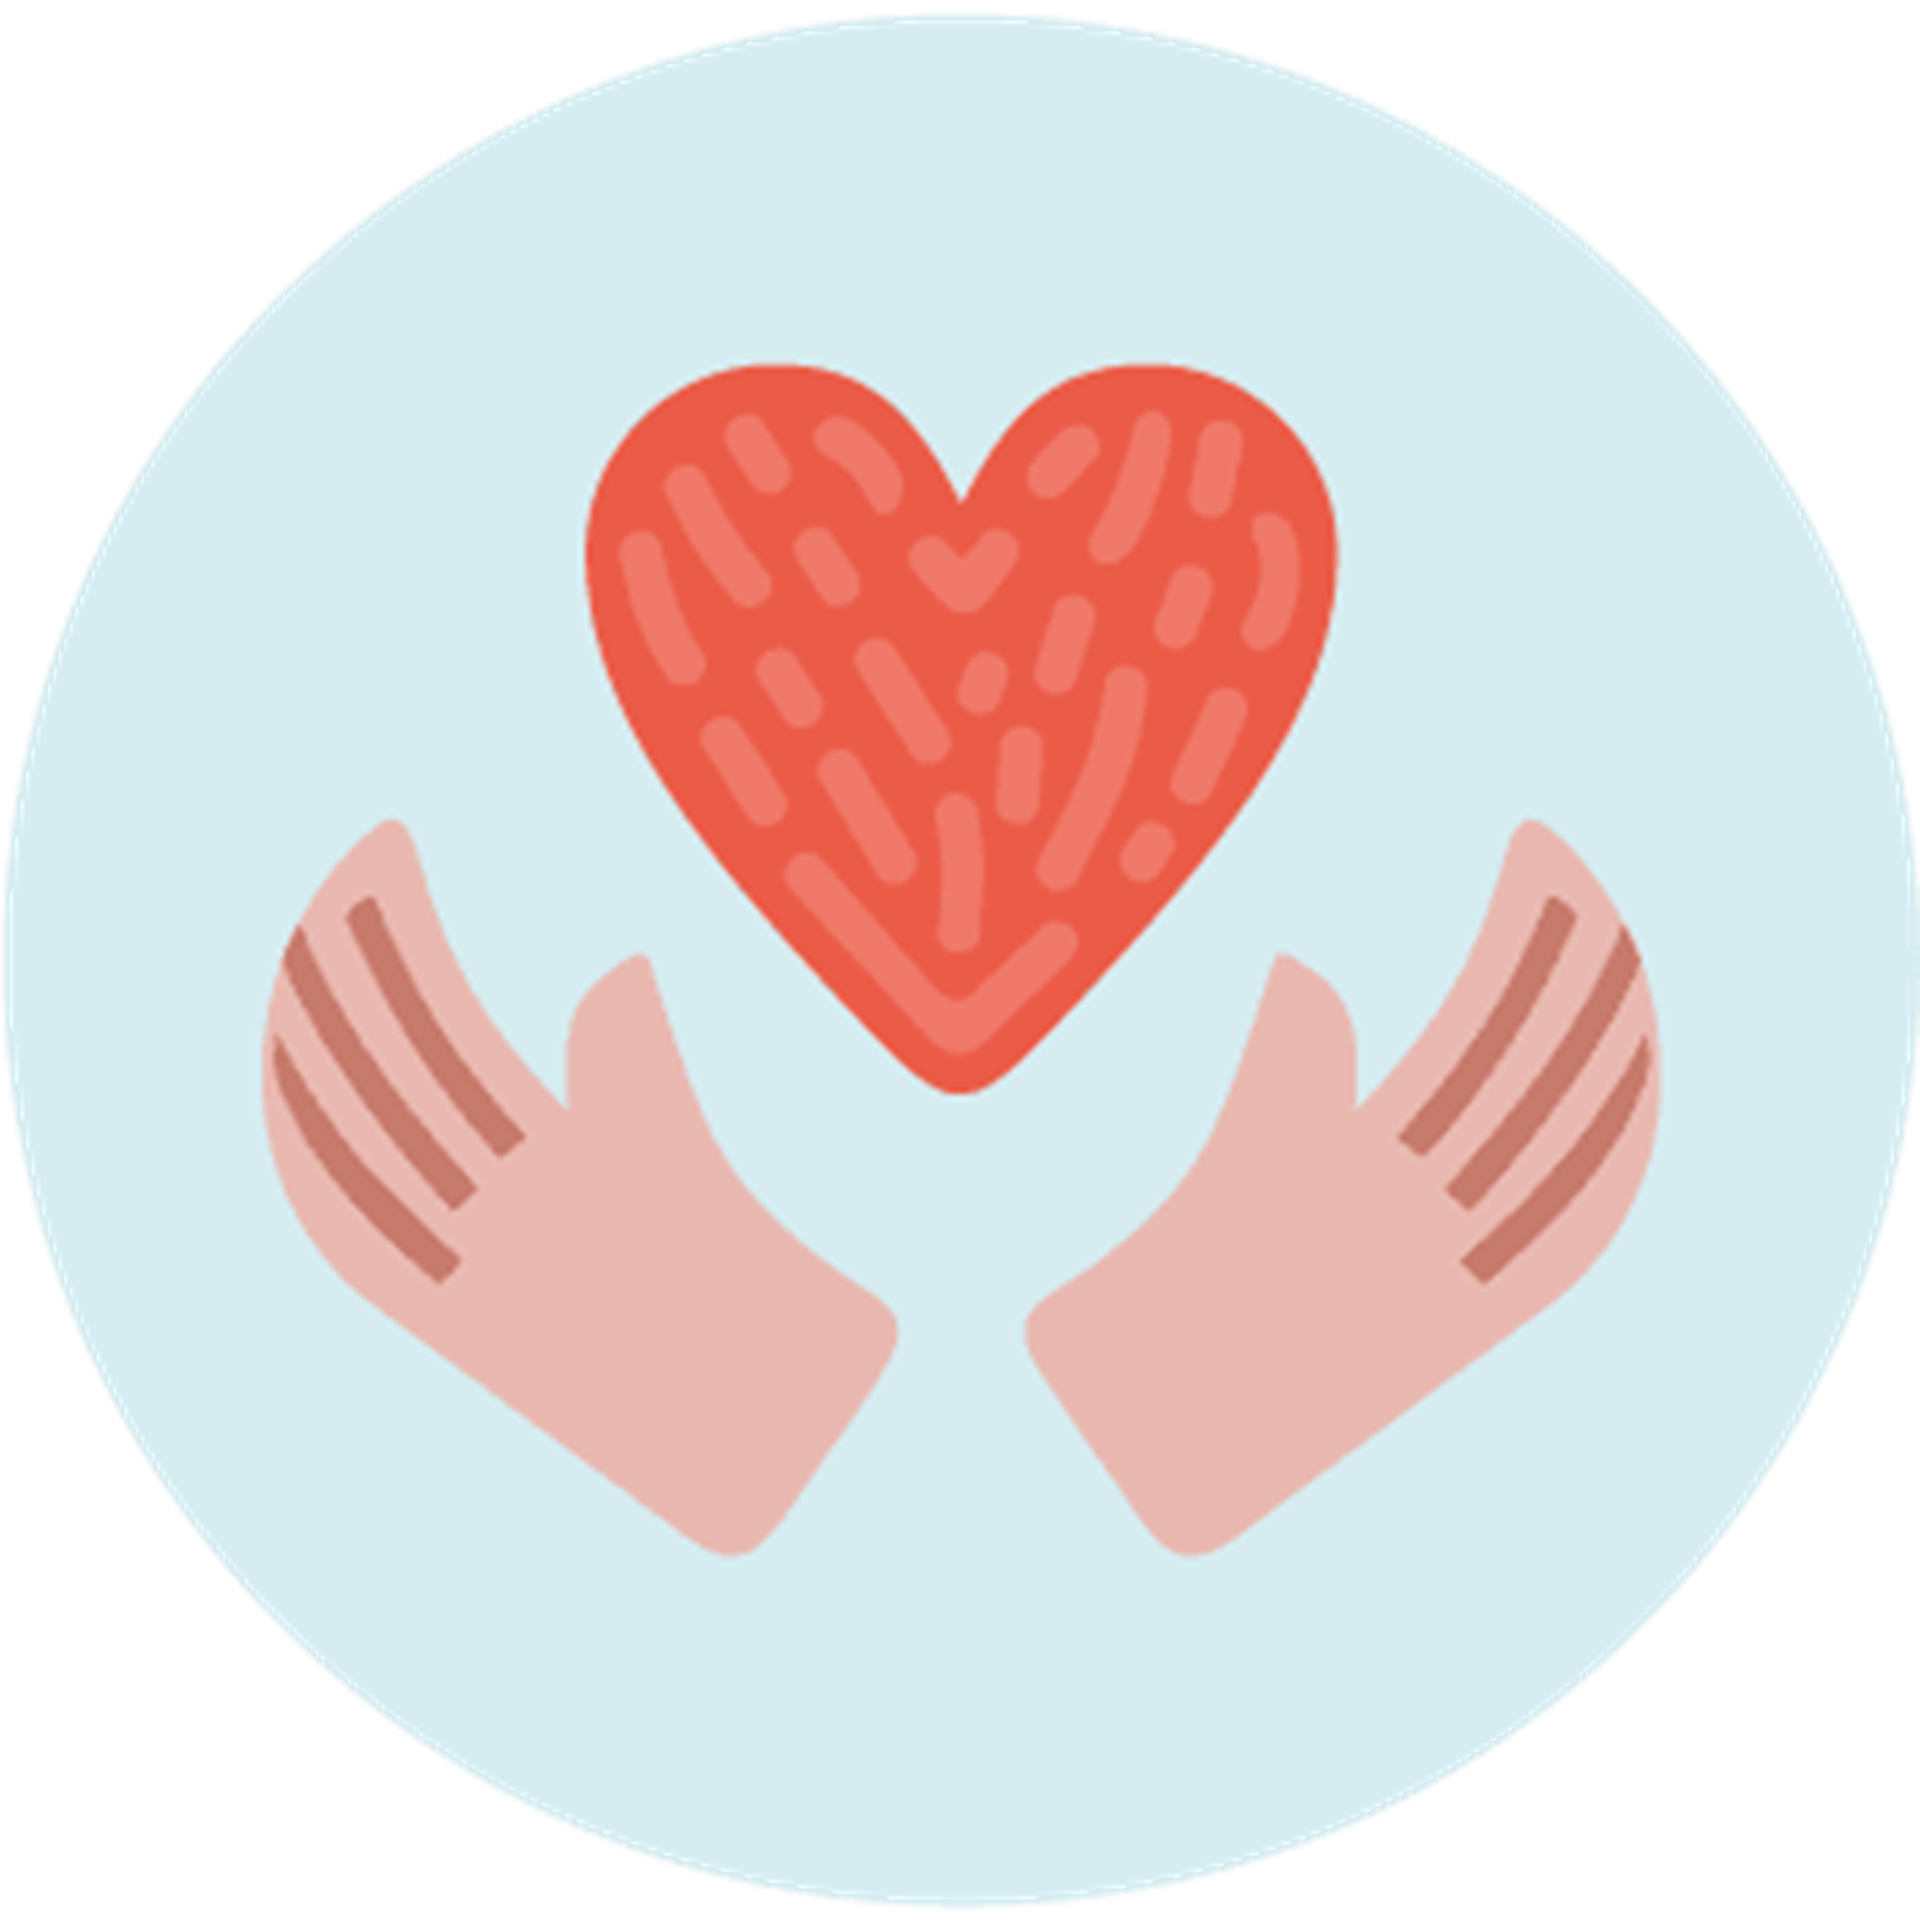 Care giver hands around a heart